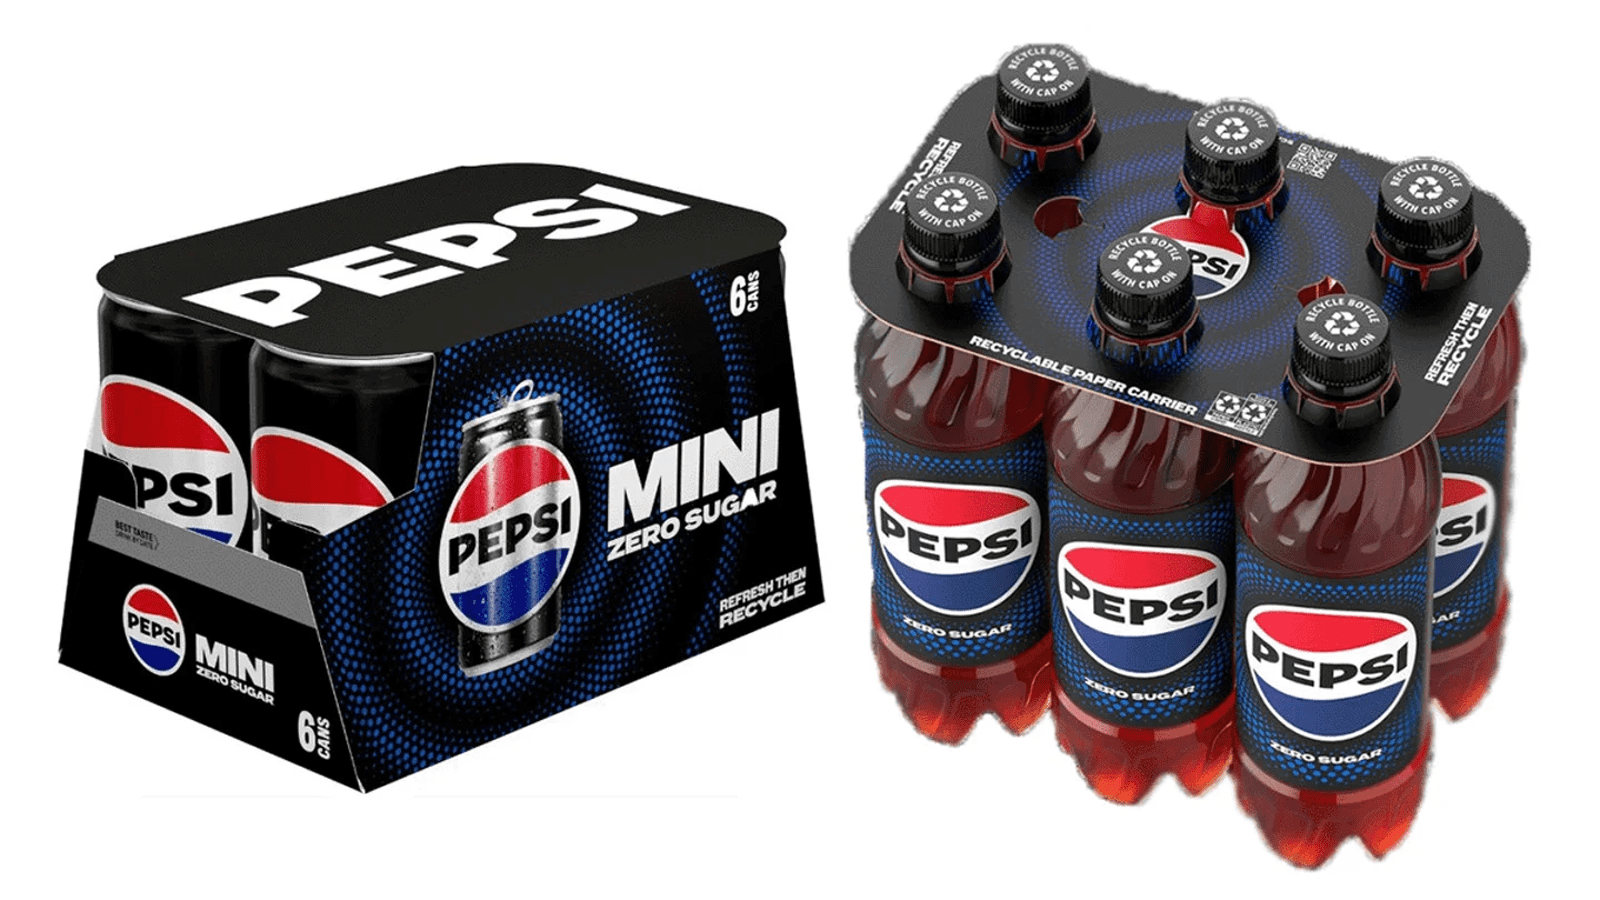 PepsiCo replaces plastic rings from beverage multipacks with paper-based designs